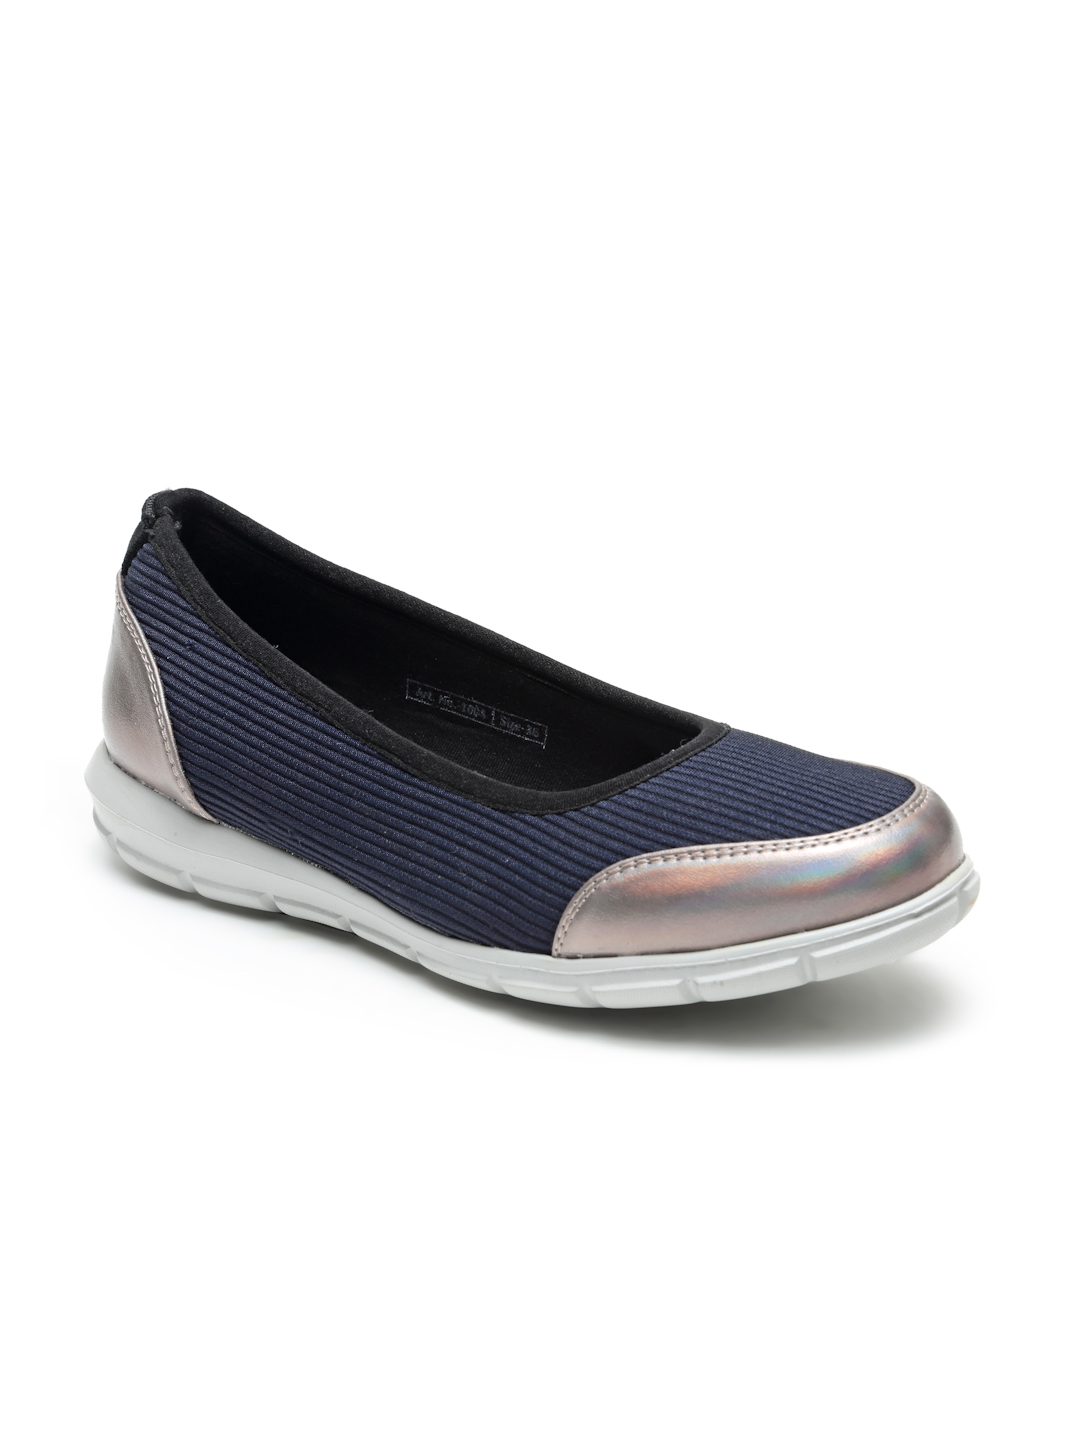 Buy Von Wellx Germany Comfort Women's Blue Casual Shoes Alice Online in Bhopal